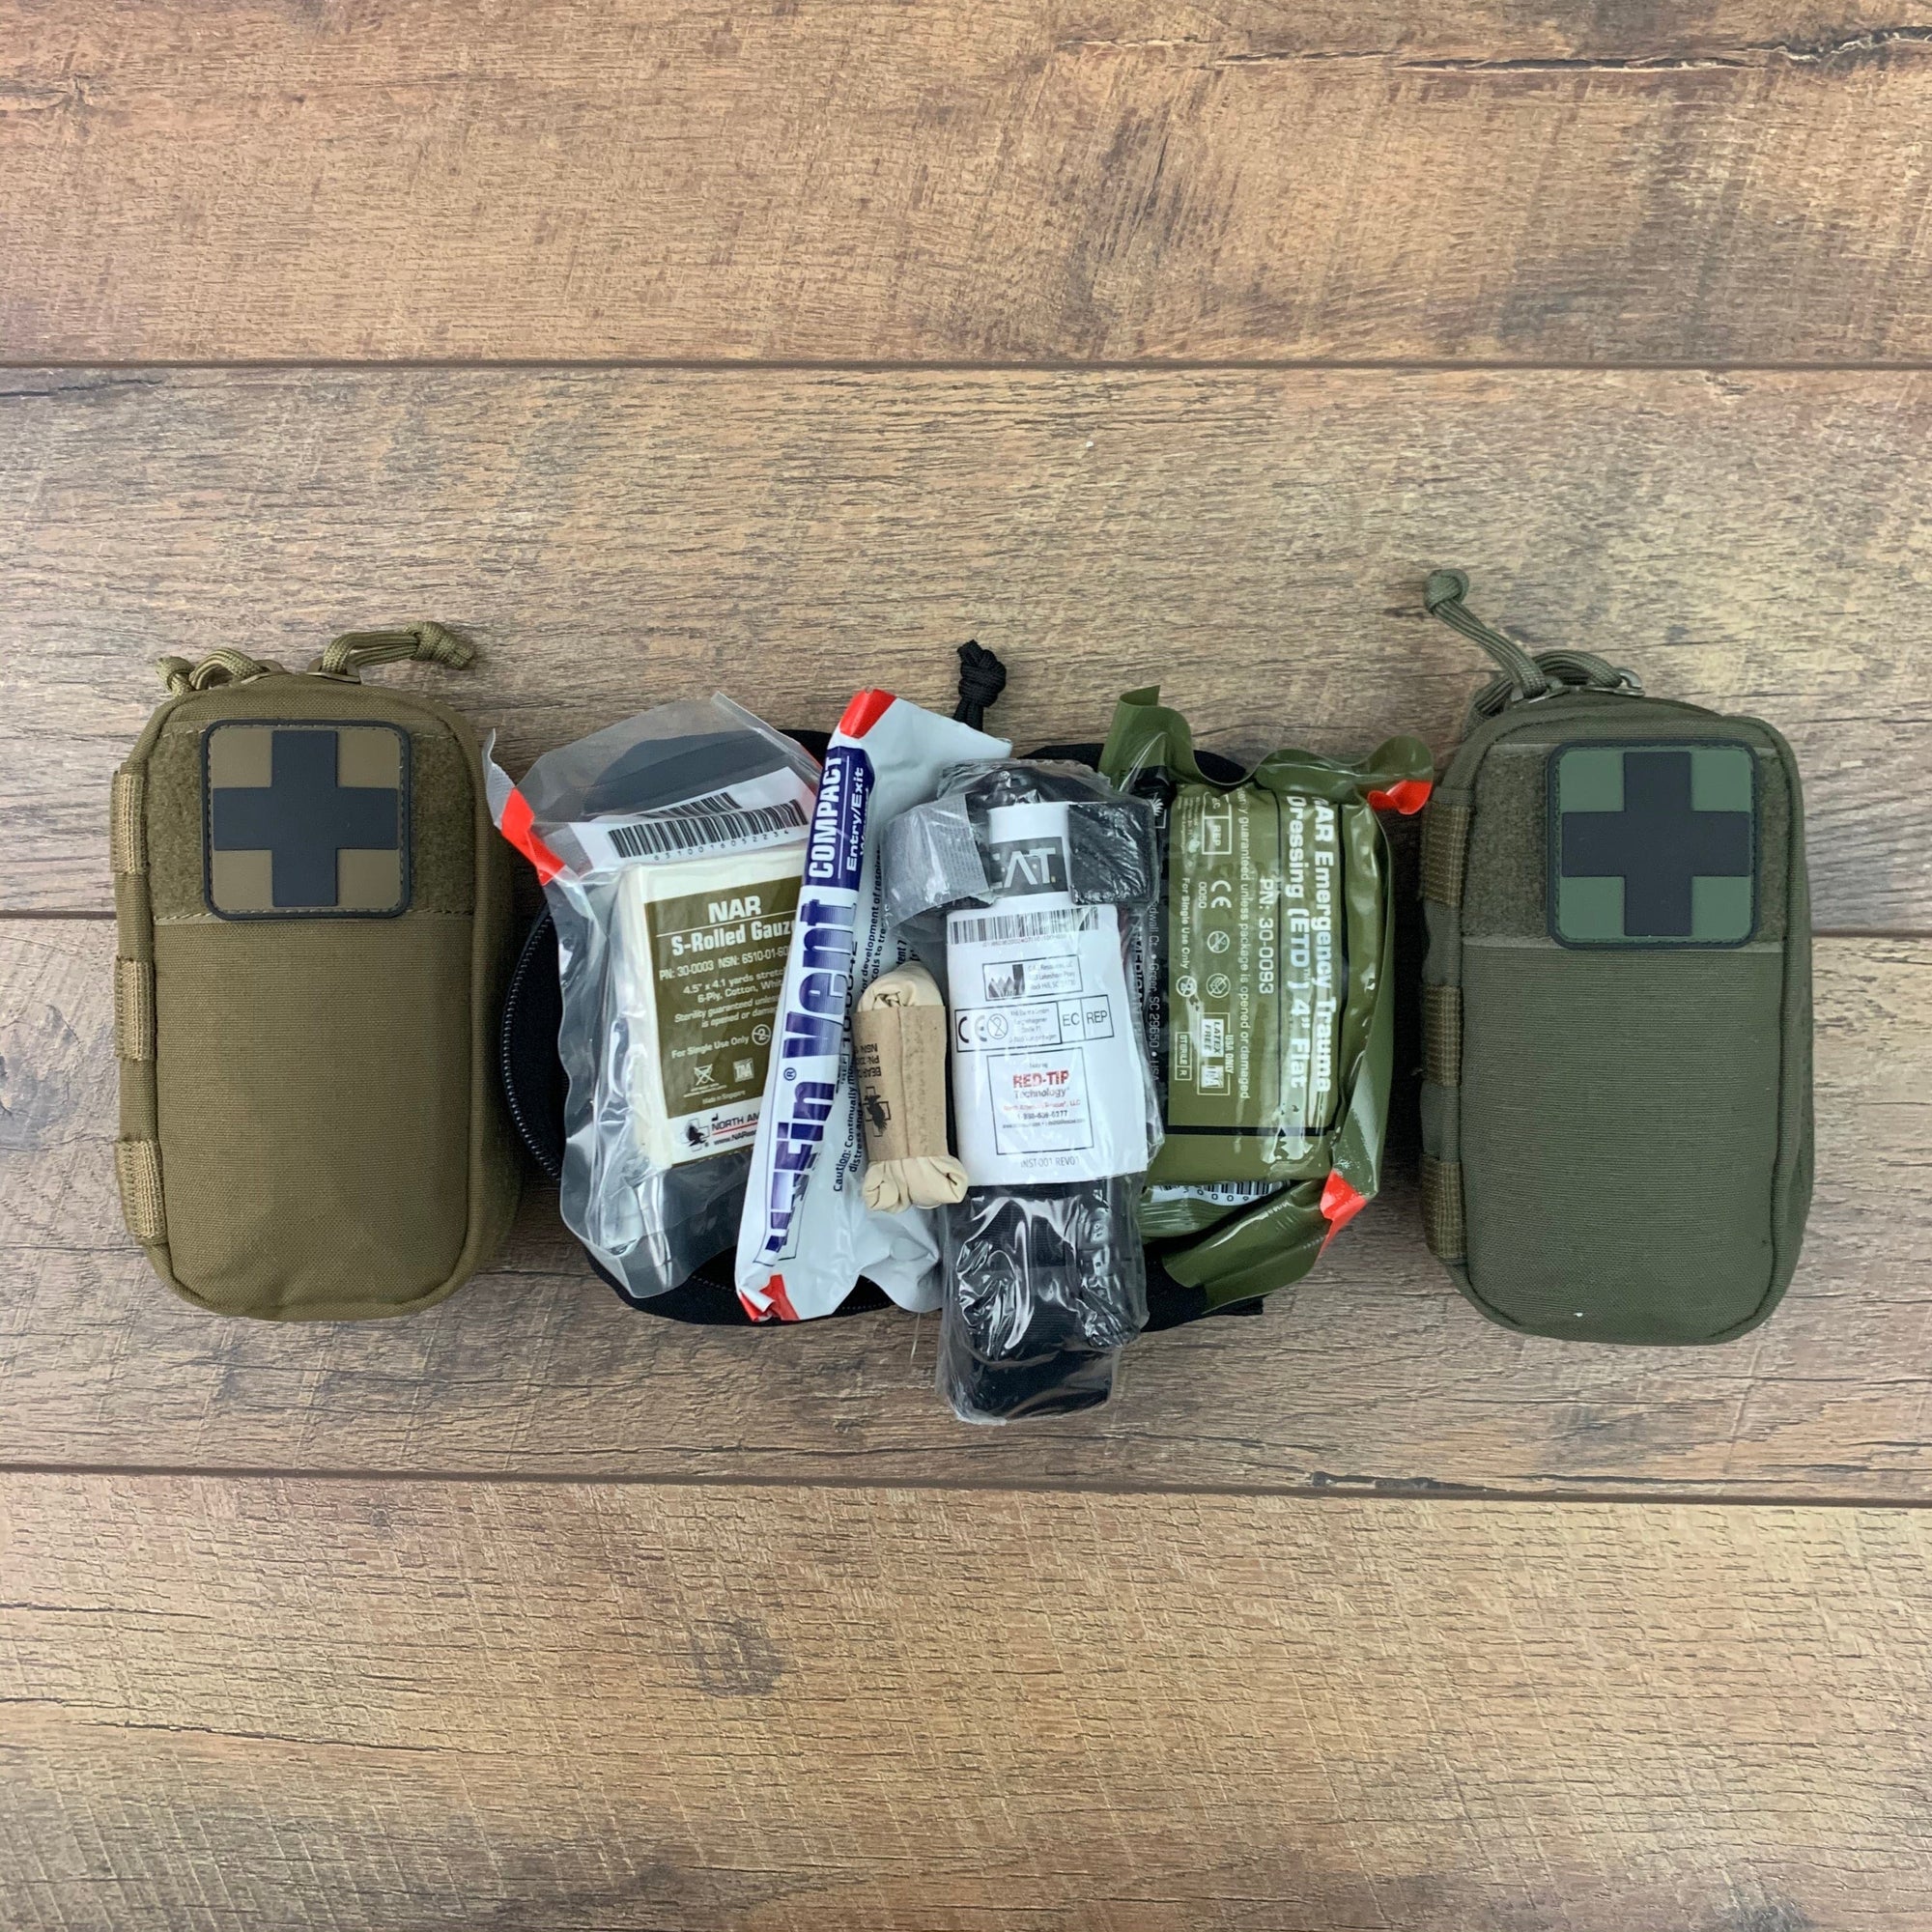 Perfect tactical medical gear for your EDC system or to use for plate carrier accessories. This MFAK mini first aid kit is available in ranger green. 